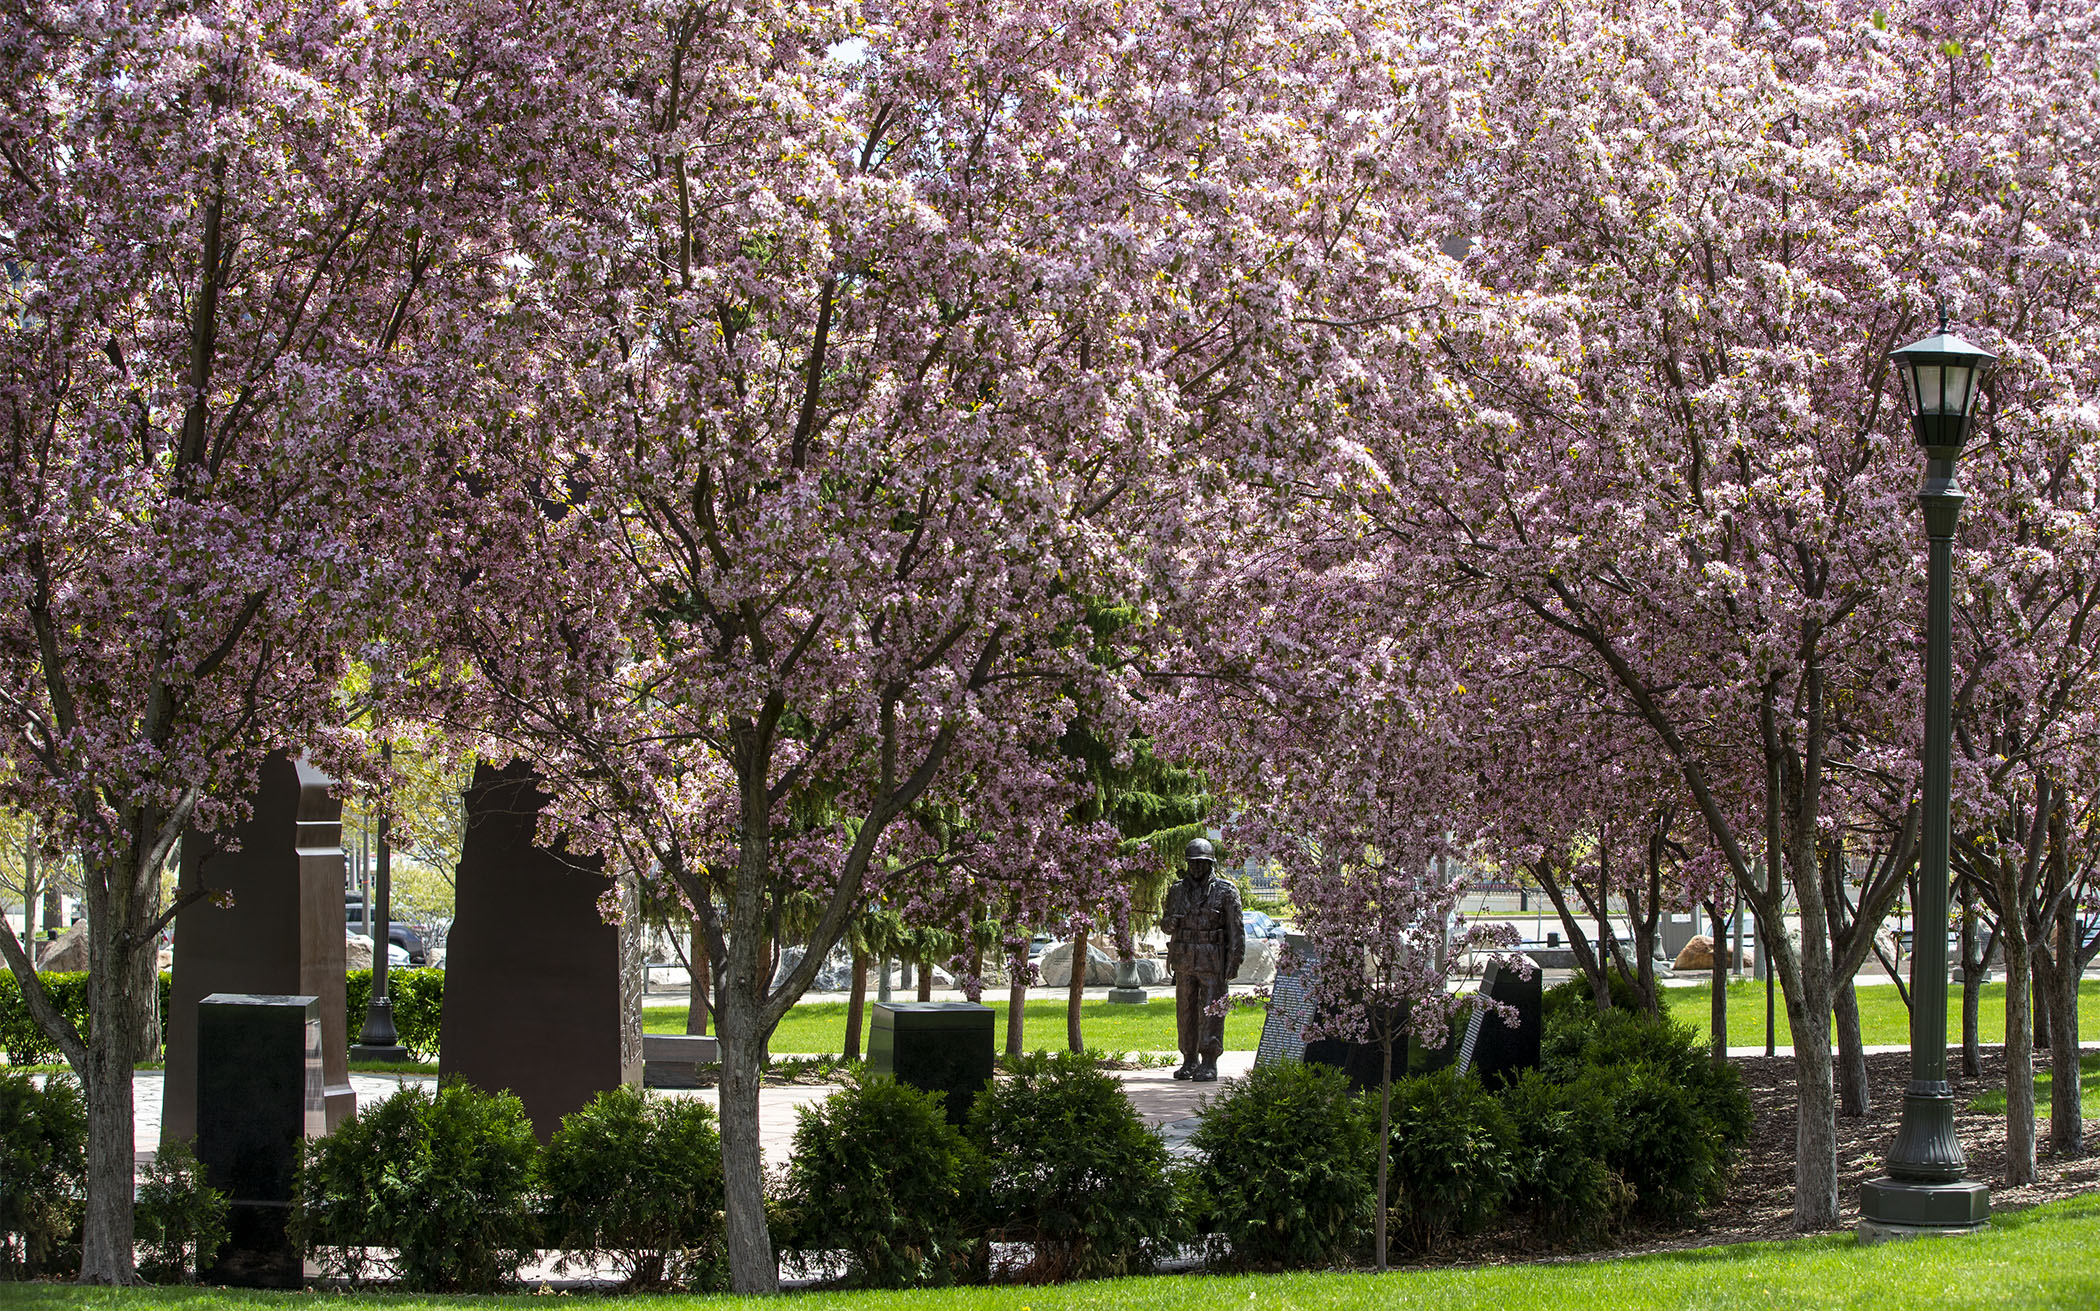 The silent sentinel stands among the spring blooms of flowering crabapple trees at the Minnesota Korean War Veterans Memorial on the Capitol Mall May 4. Photo by Paul Battaglia 